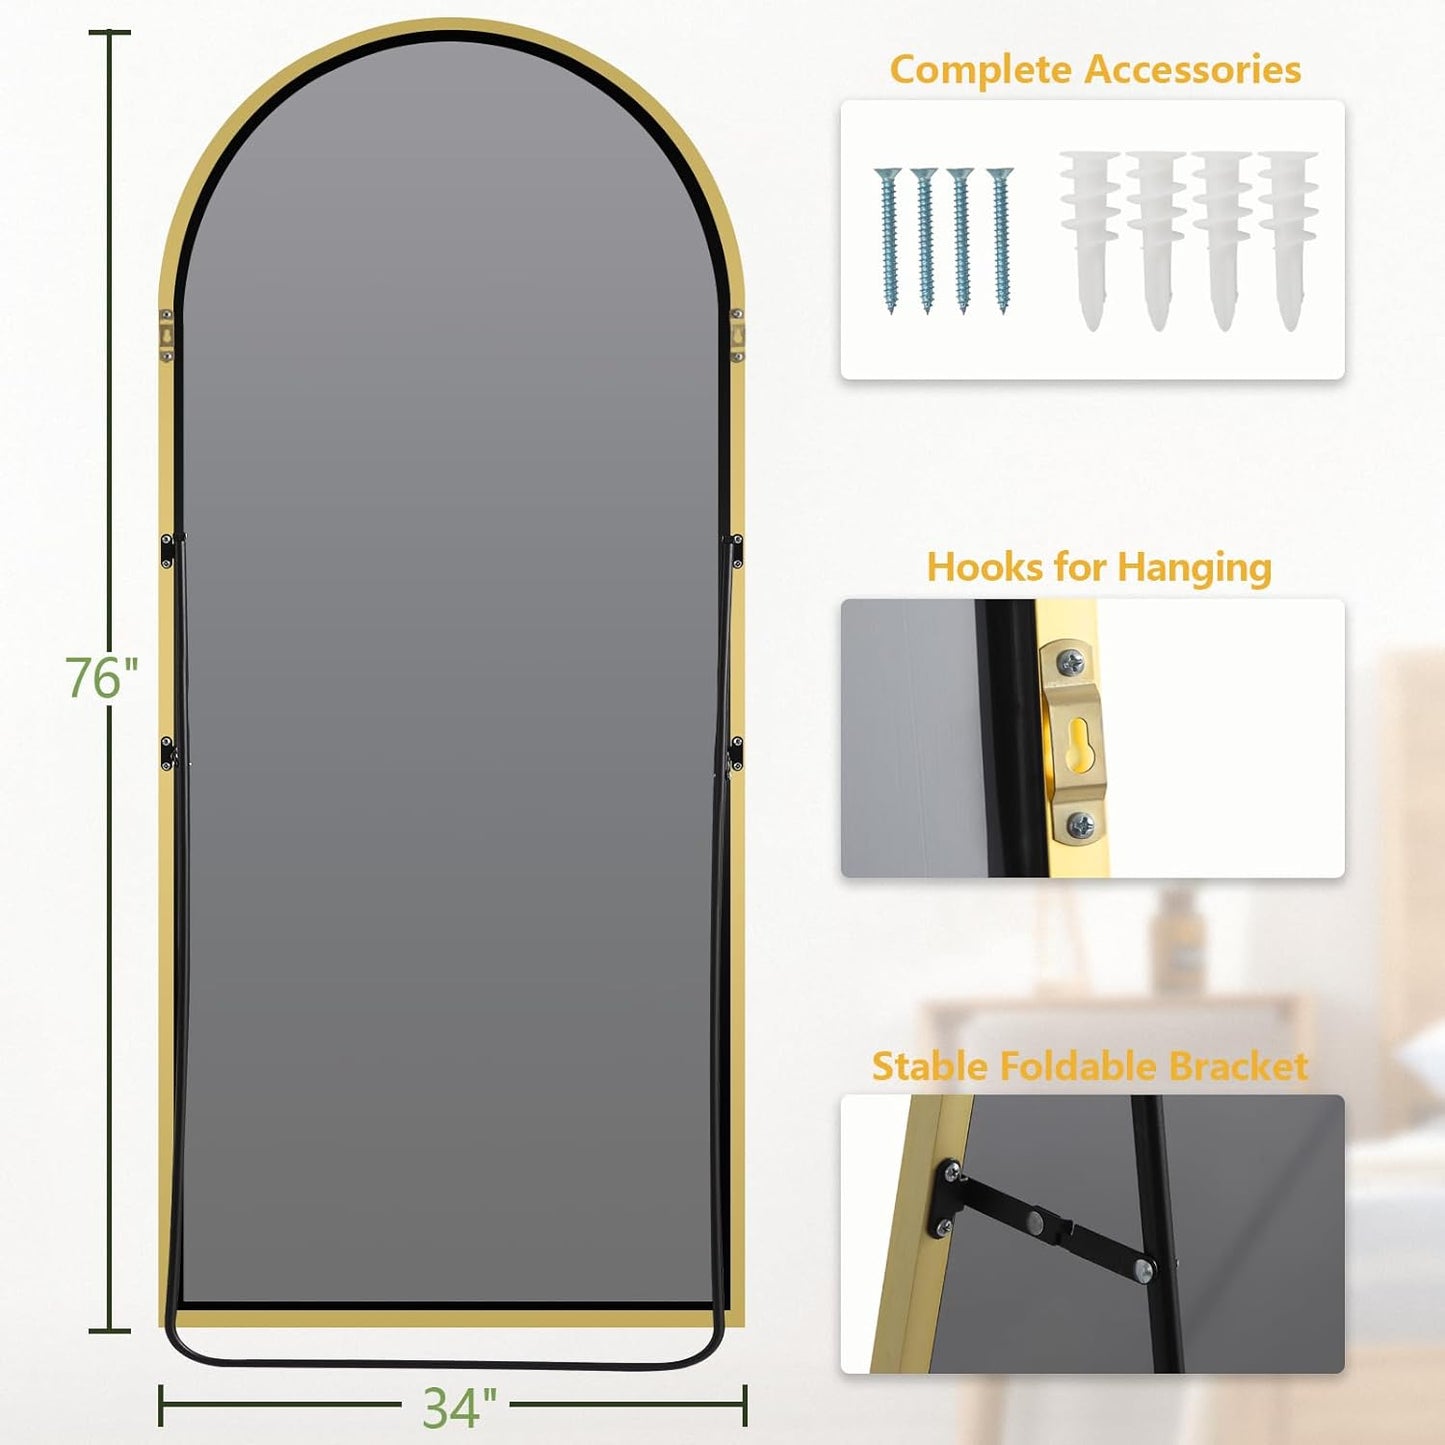 76"X34" Large Mirror Full Length, Arched Full Length Mirror with Stand, Extra Large Floor Mirror for Bedroom Living Room Cloakroom Gym, Hanging Standing or Leaning Full Body Mirror, Gold - Design By Technique